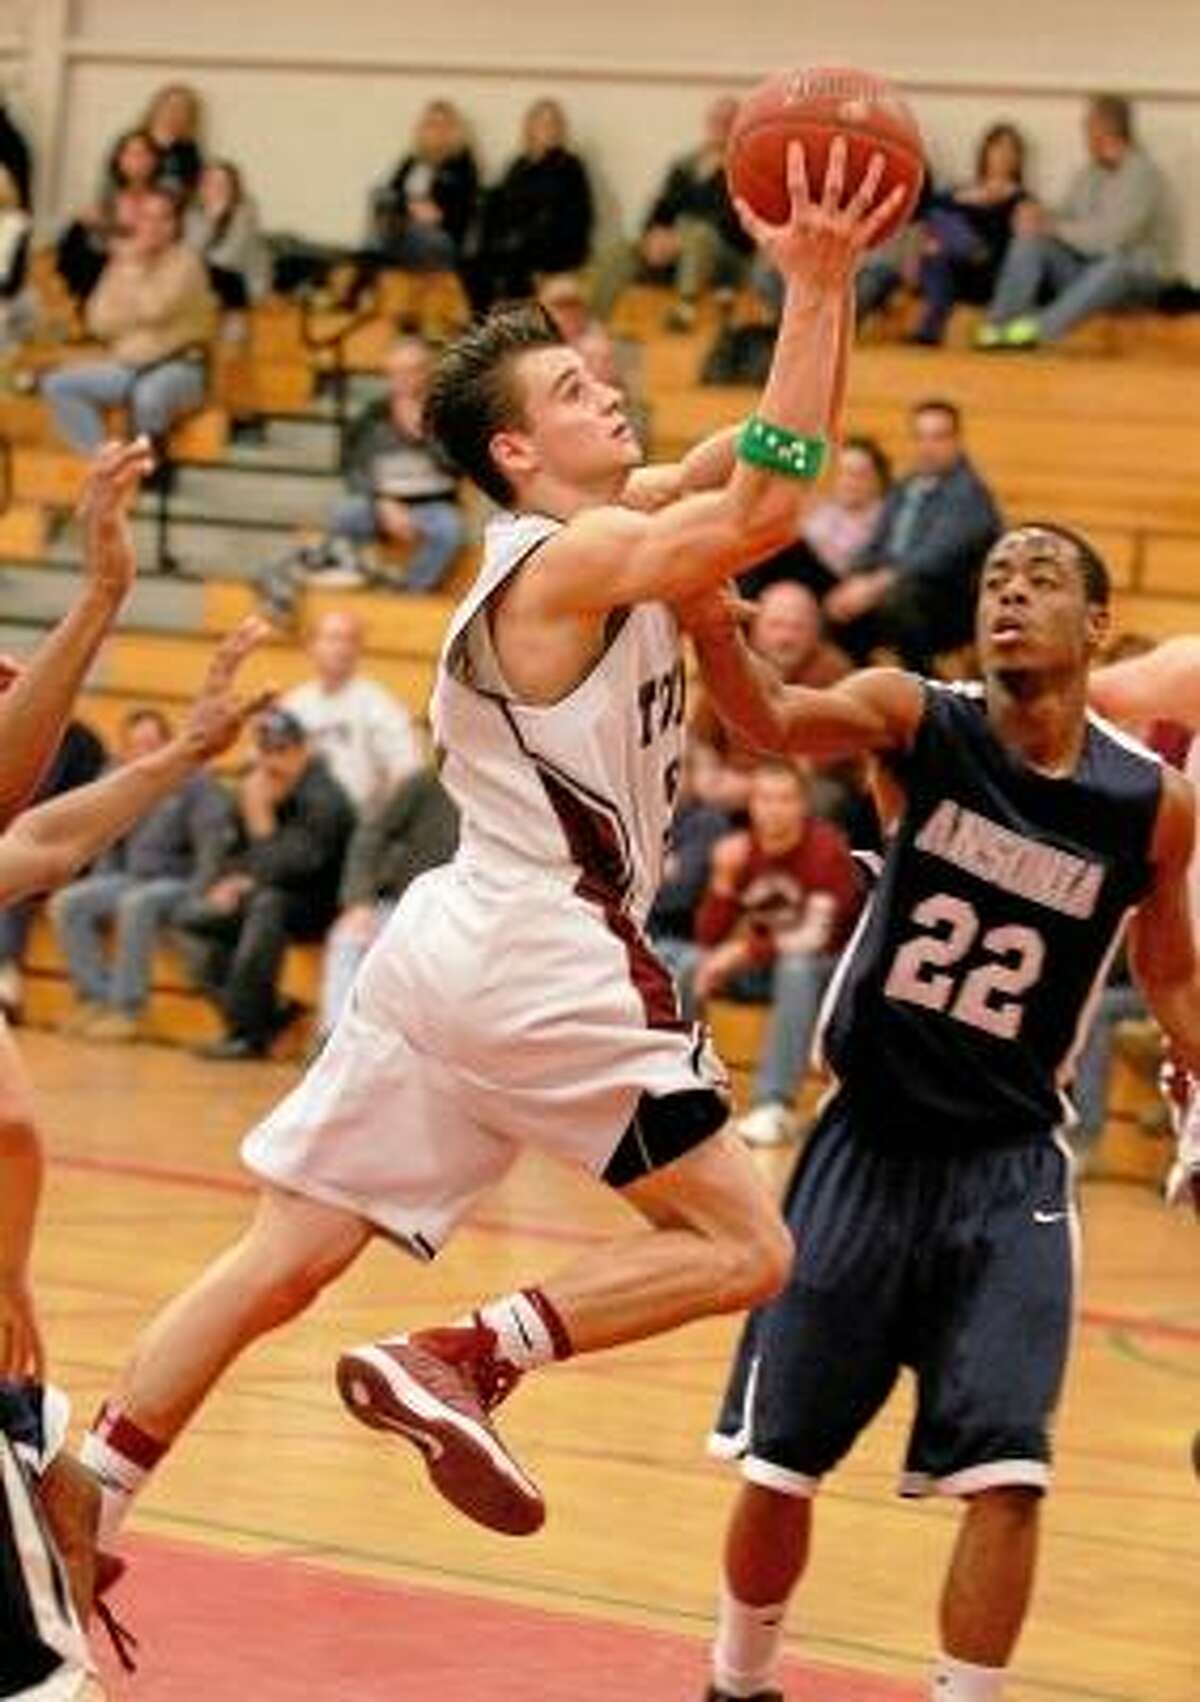 Torrington's Austin Kelson drives to the basket against Ansonia. Photo by Marianne Killackey/Special to Register Citizen